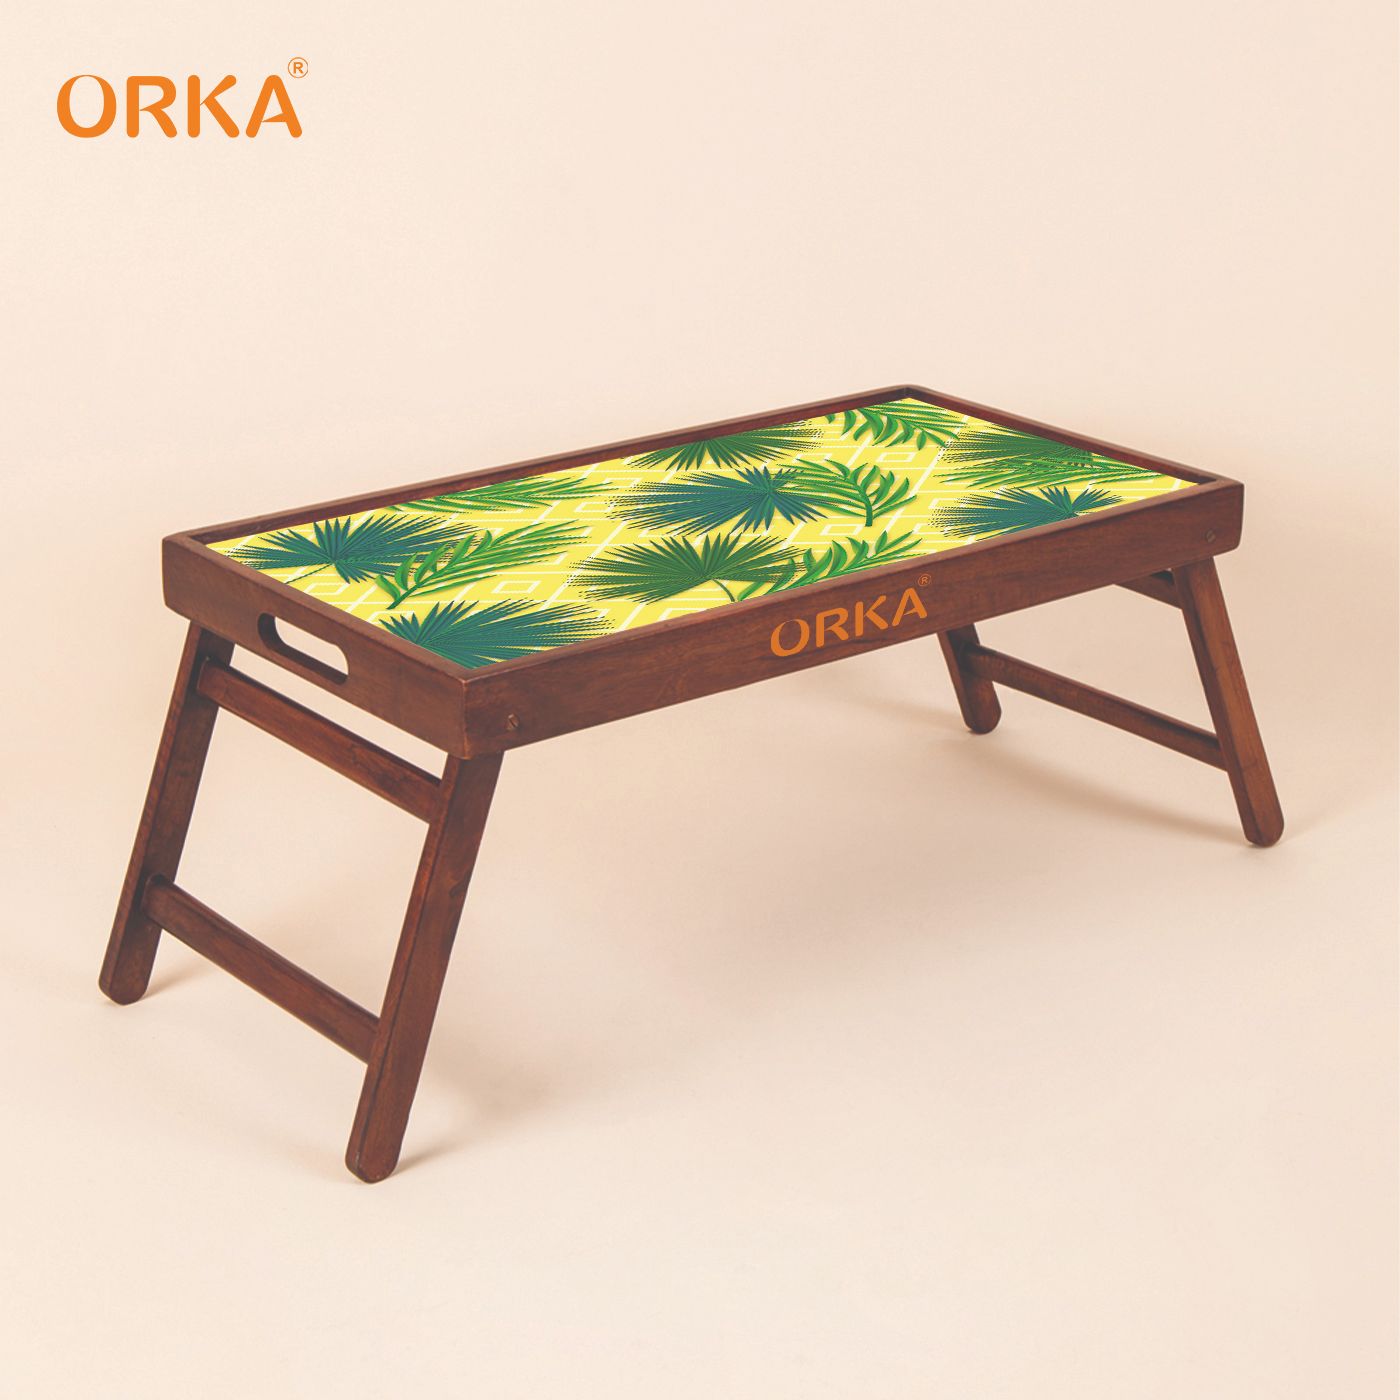 ORKA Yellow Palms Foldable Pine Wood Breakfast Table (Green, Yellow)  